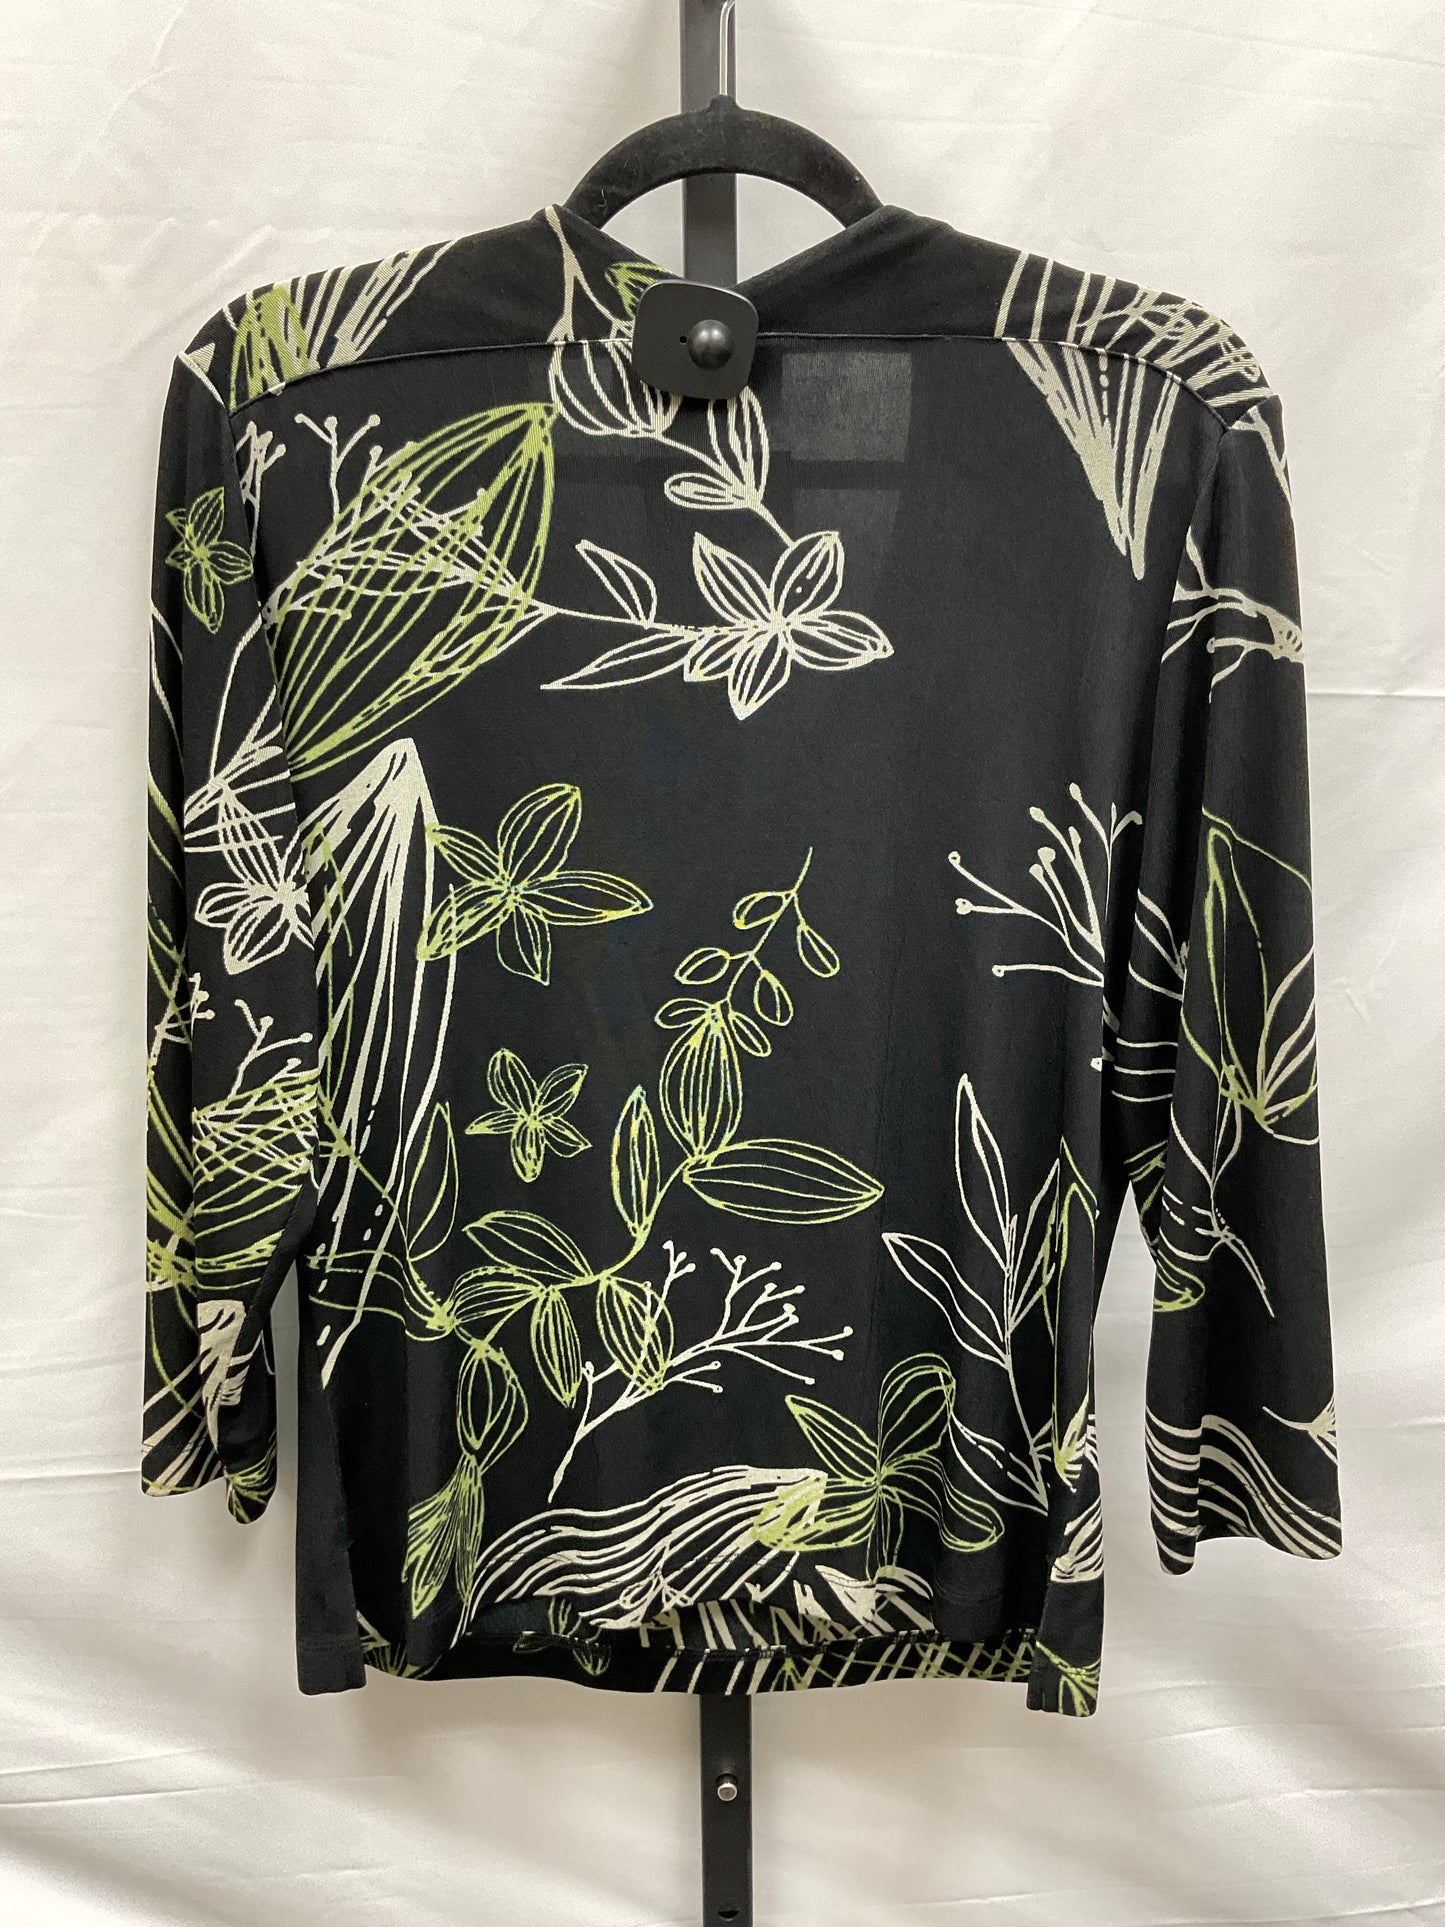 Black Top Long Sleeve Chicos, Size M